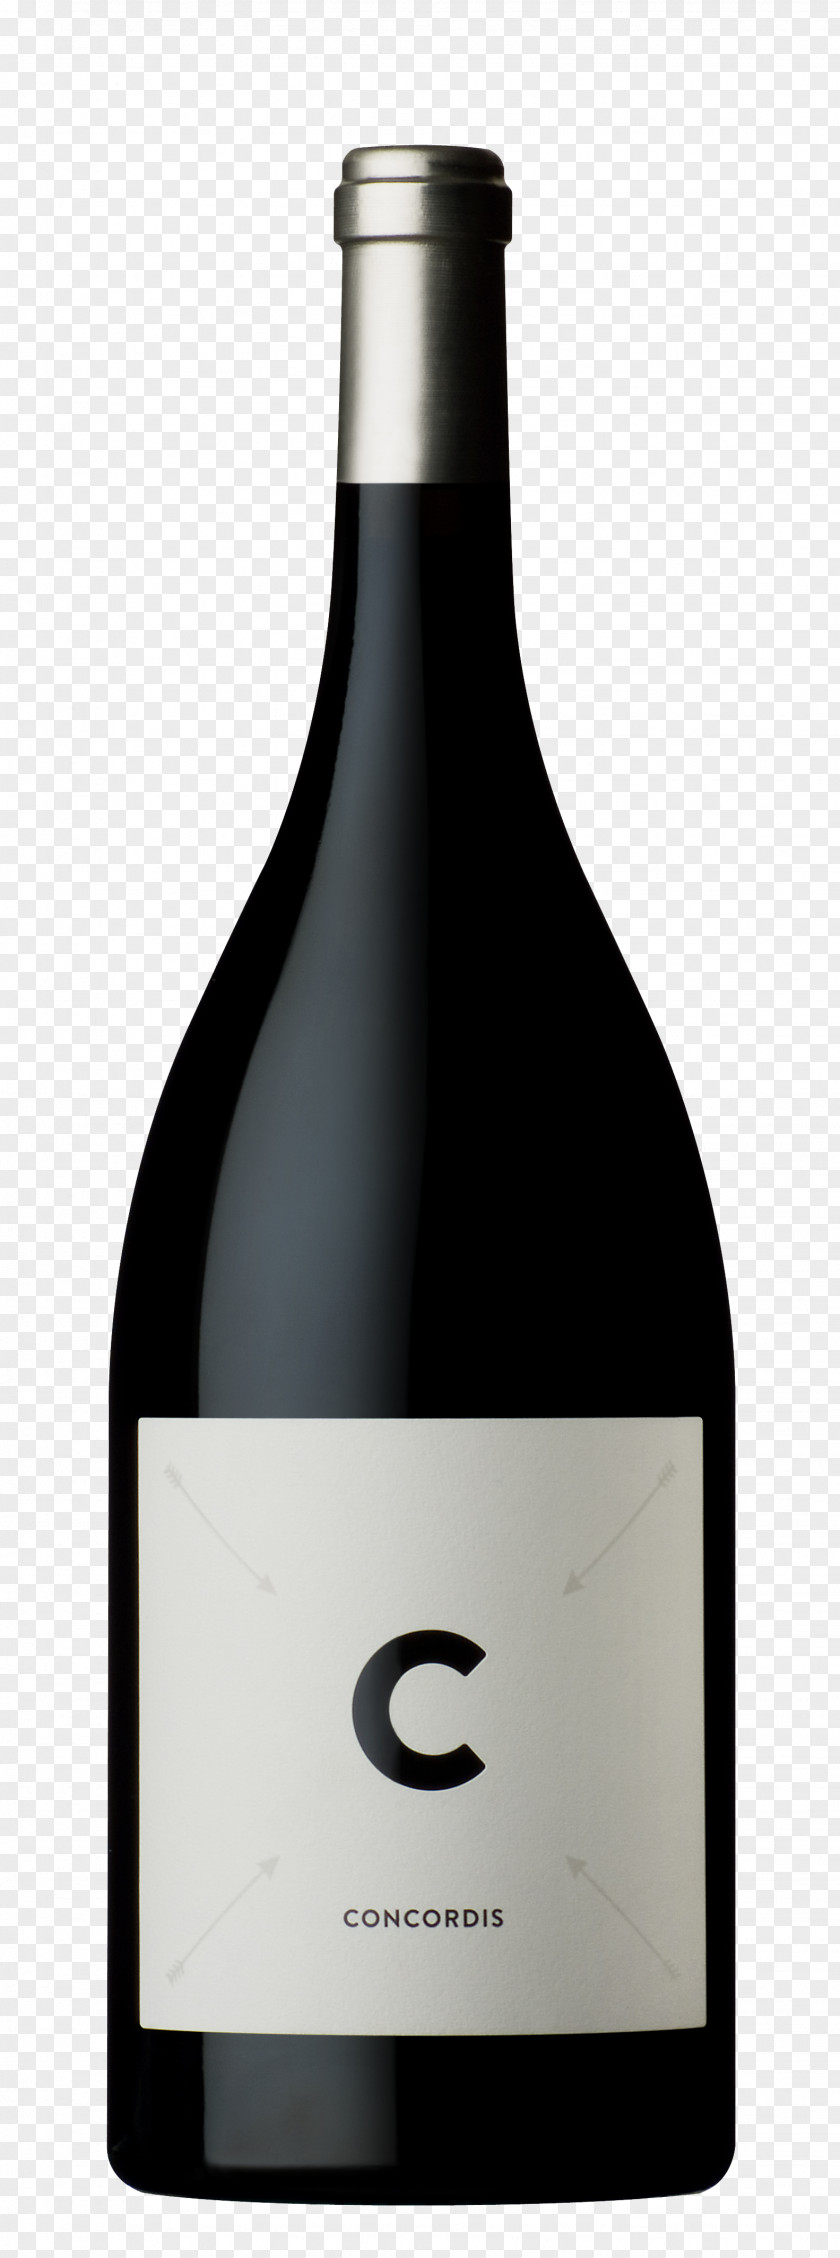 Wine Two Hands Wines Barossa Valley Shiraz Chardonnay PNG